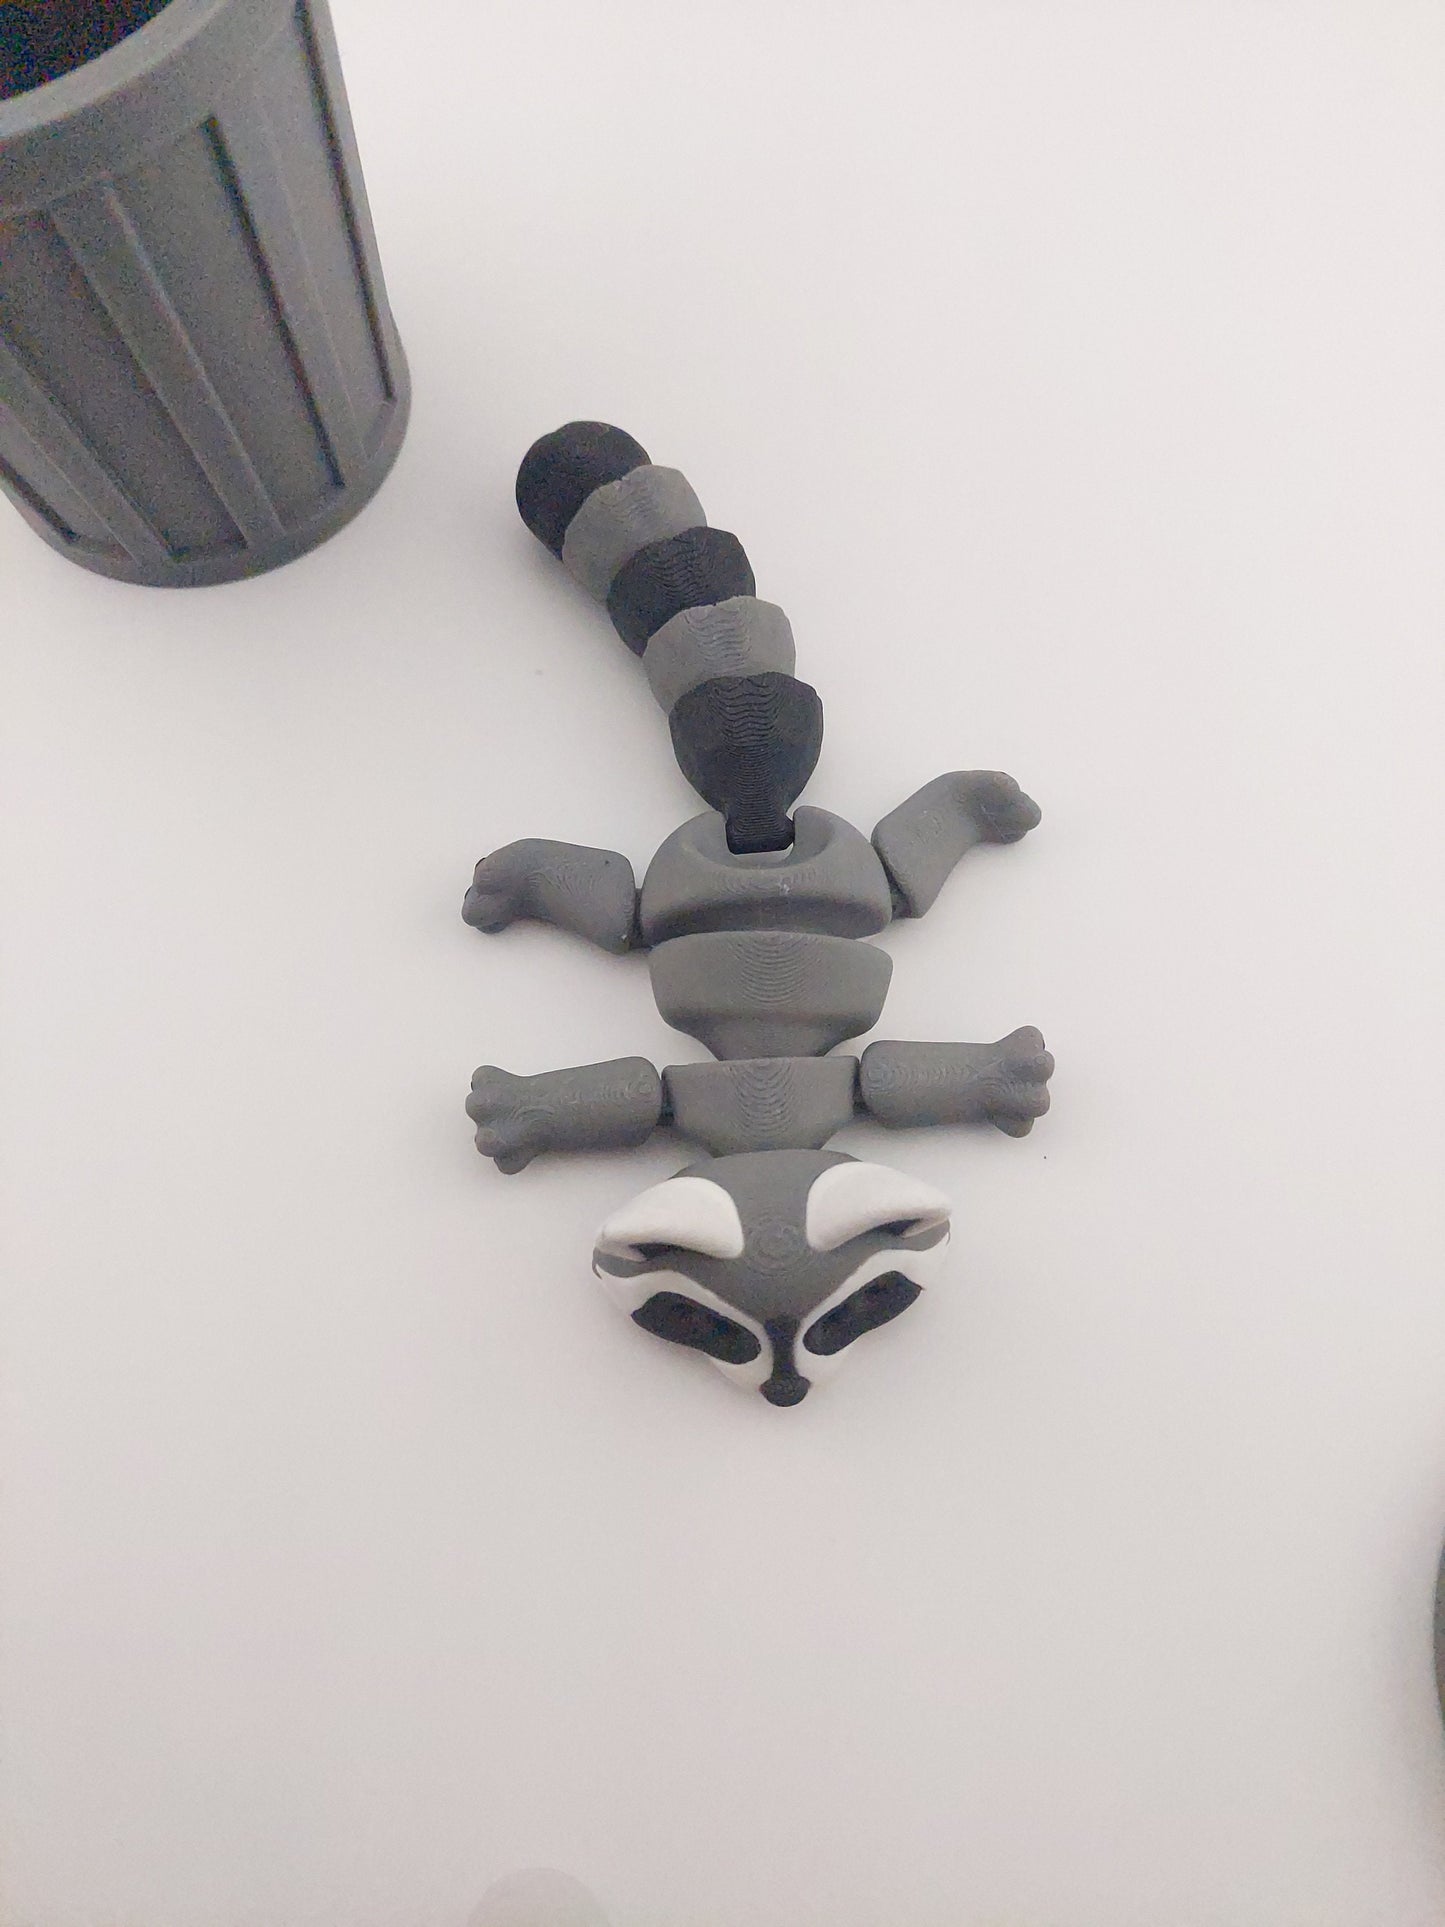 1 Articulated Racoon Trash Panda - 3D Printed Fidget Fantasy Creature - Authorized Seller